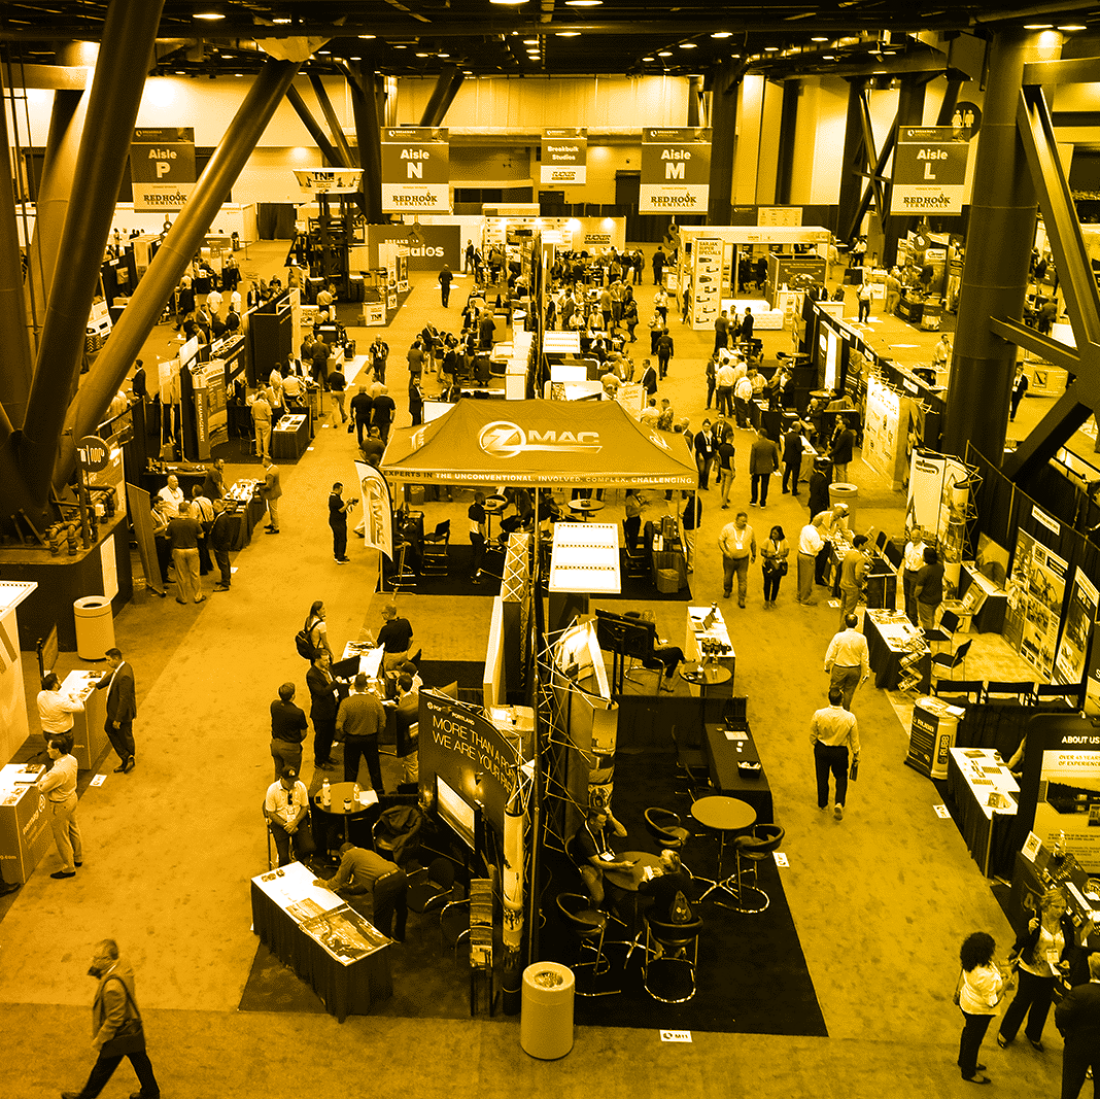 birds eye view of people walking around at a trade show